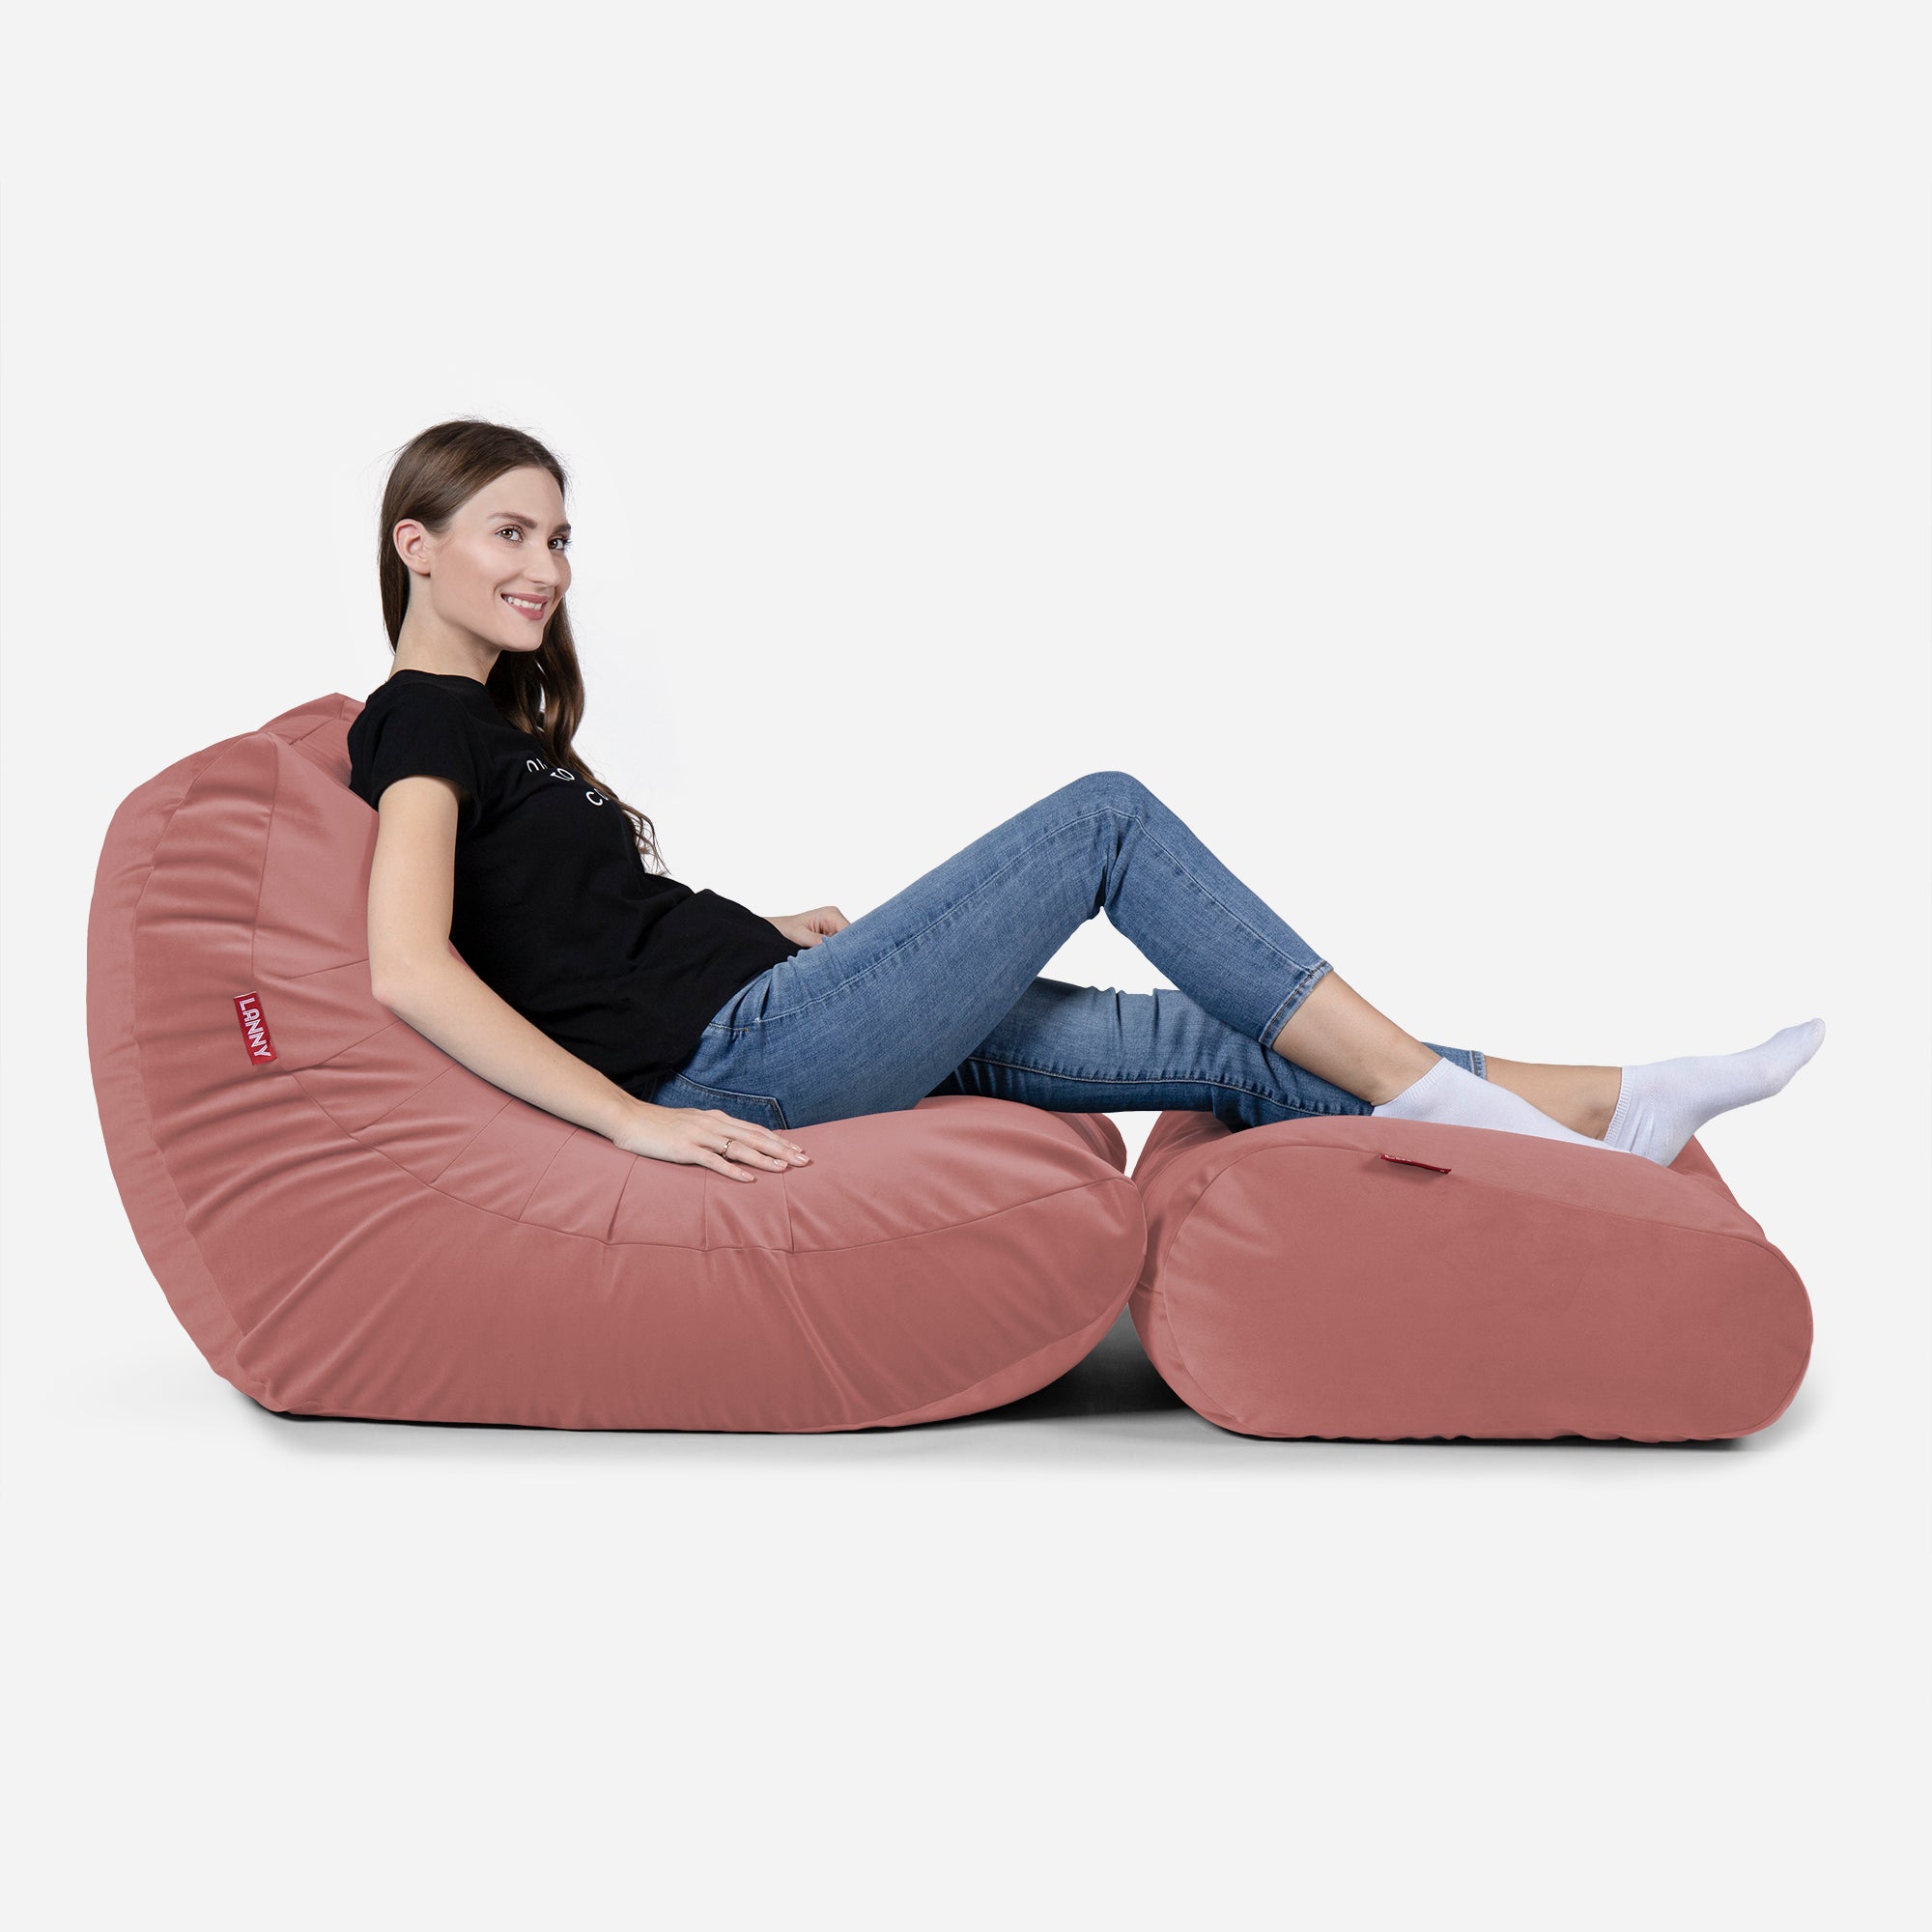 Beanbag Curvy Design Pink color with girl seating on it